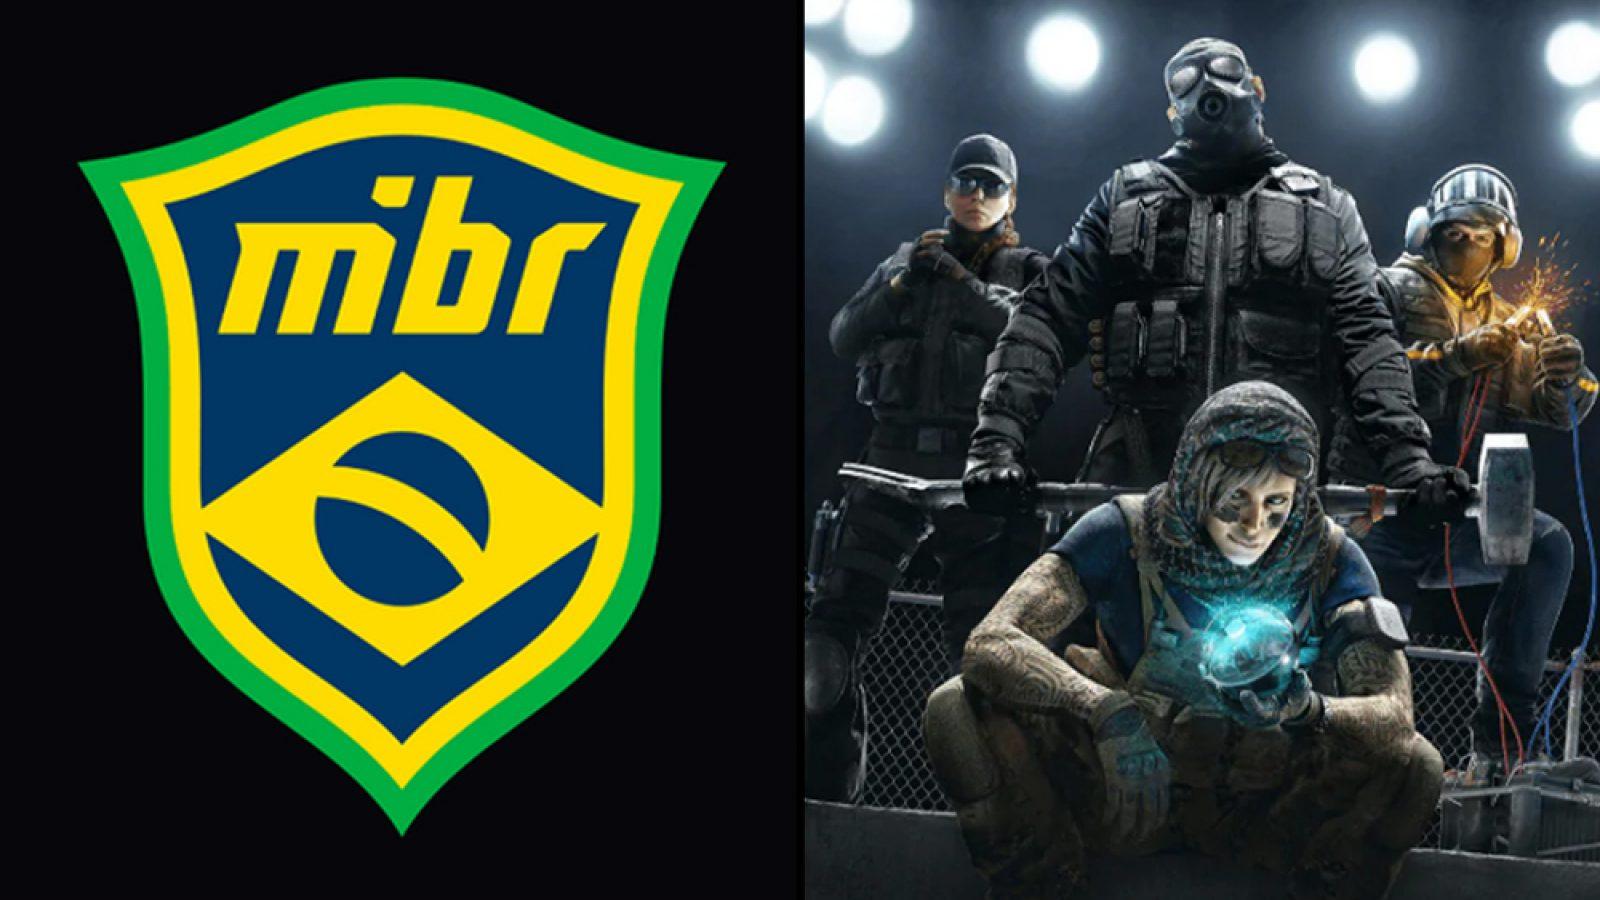 MIBR has announced its roster for the new season. CS:GO news - eSports  events review, analytics, announcements, interviews, statistics - GTt9zmPhc